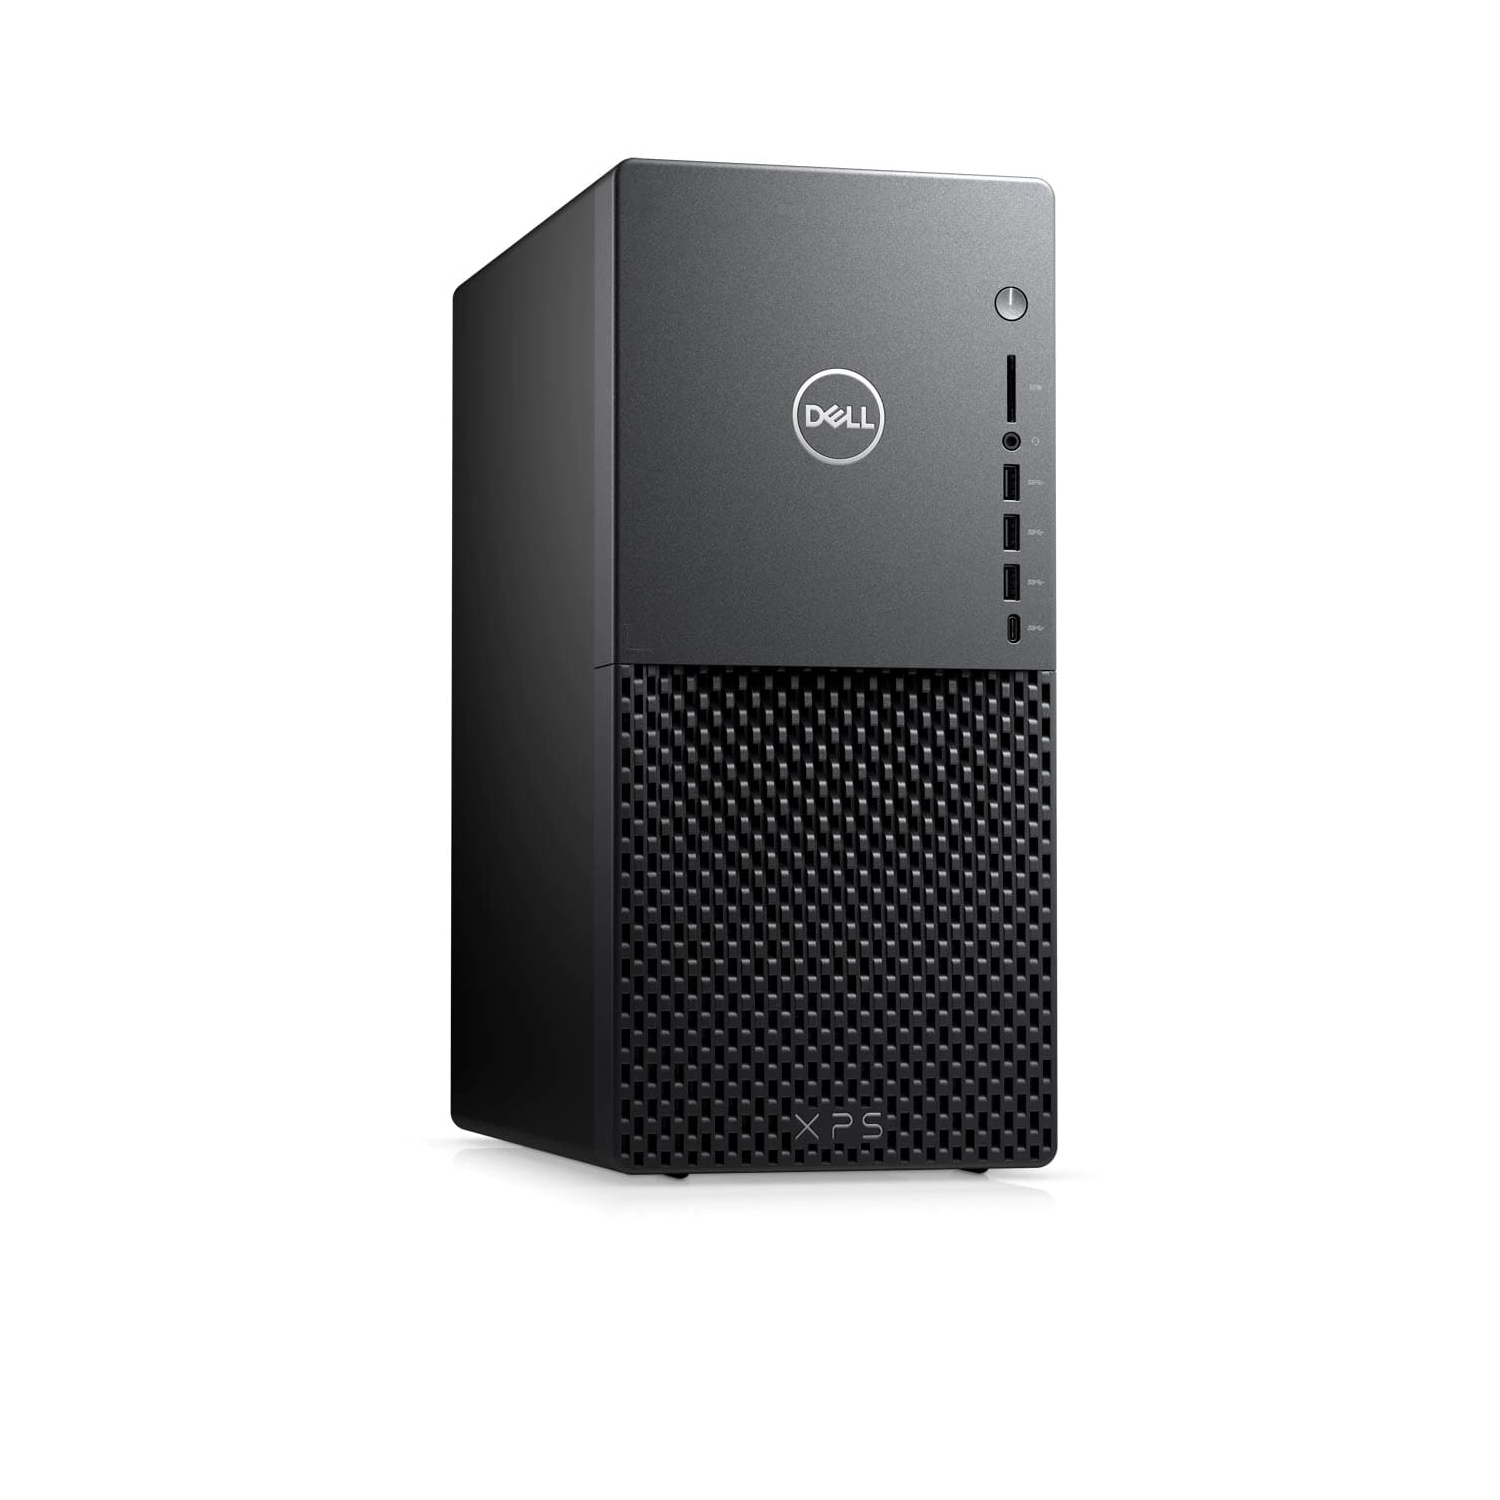 Refurbished (Excellent) - Dell XPS 8940 Desktop (2020) | Core i7 - 512GB SSD - 16GB RAM - 1660 Ti | 8 Cores @ 4.8 GHz - 10th Gen CPU Certified Refurbished